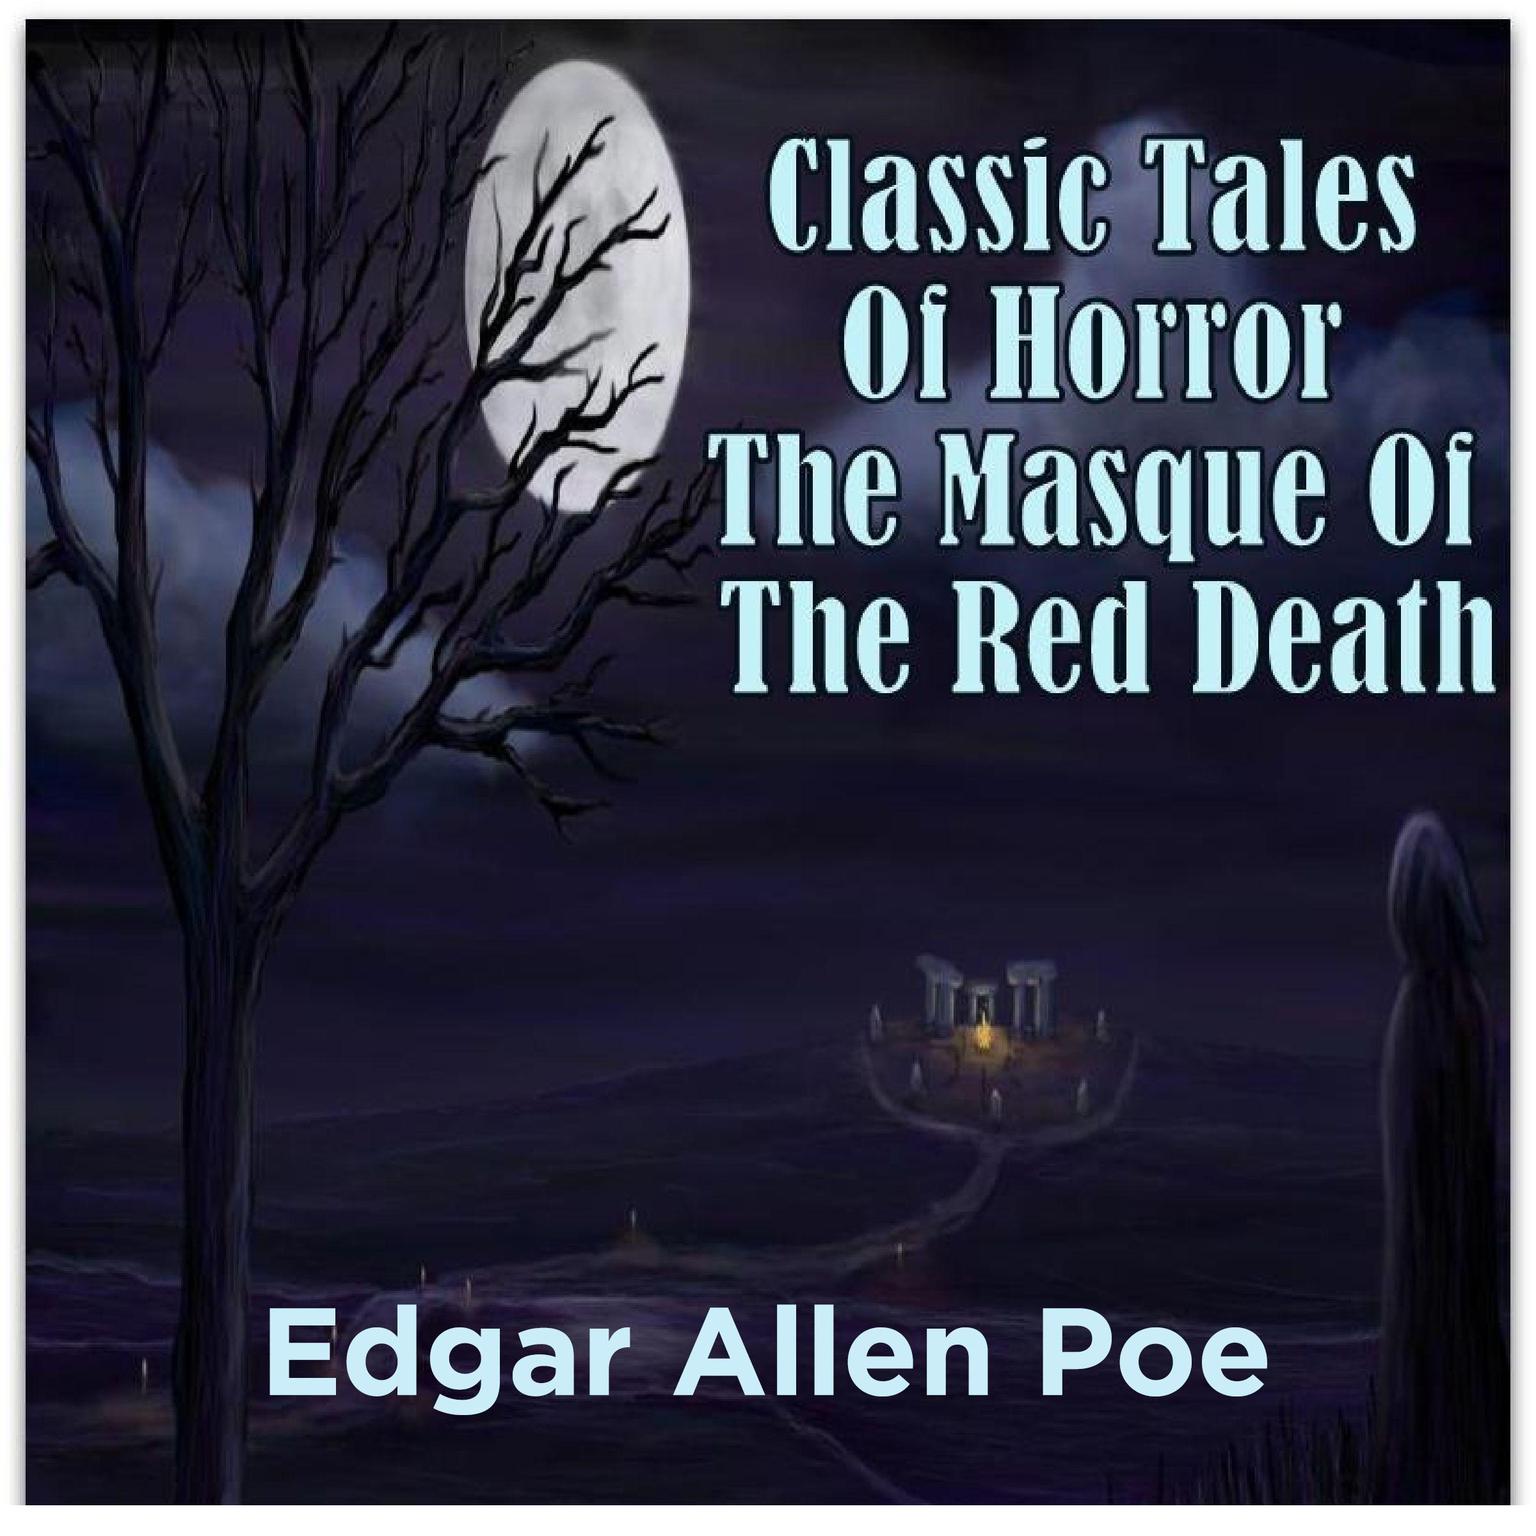 Classic Tales Of Horror The Masque Of The Red Death Audiobook, by Edgar Allan Poe